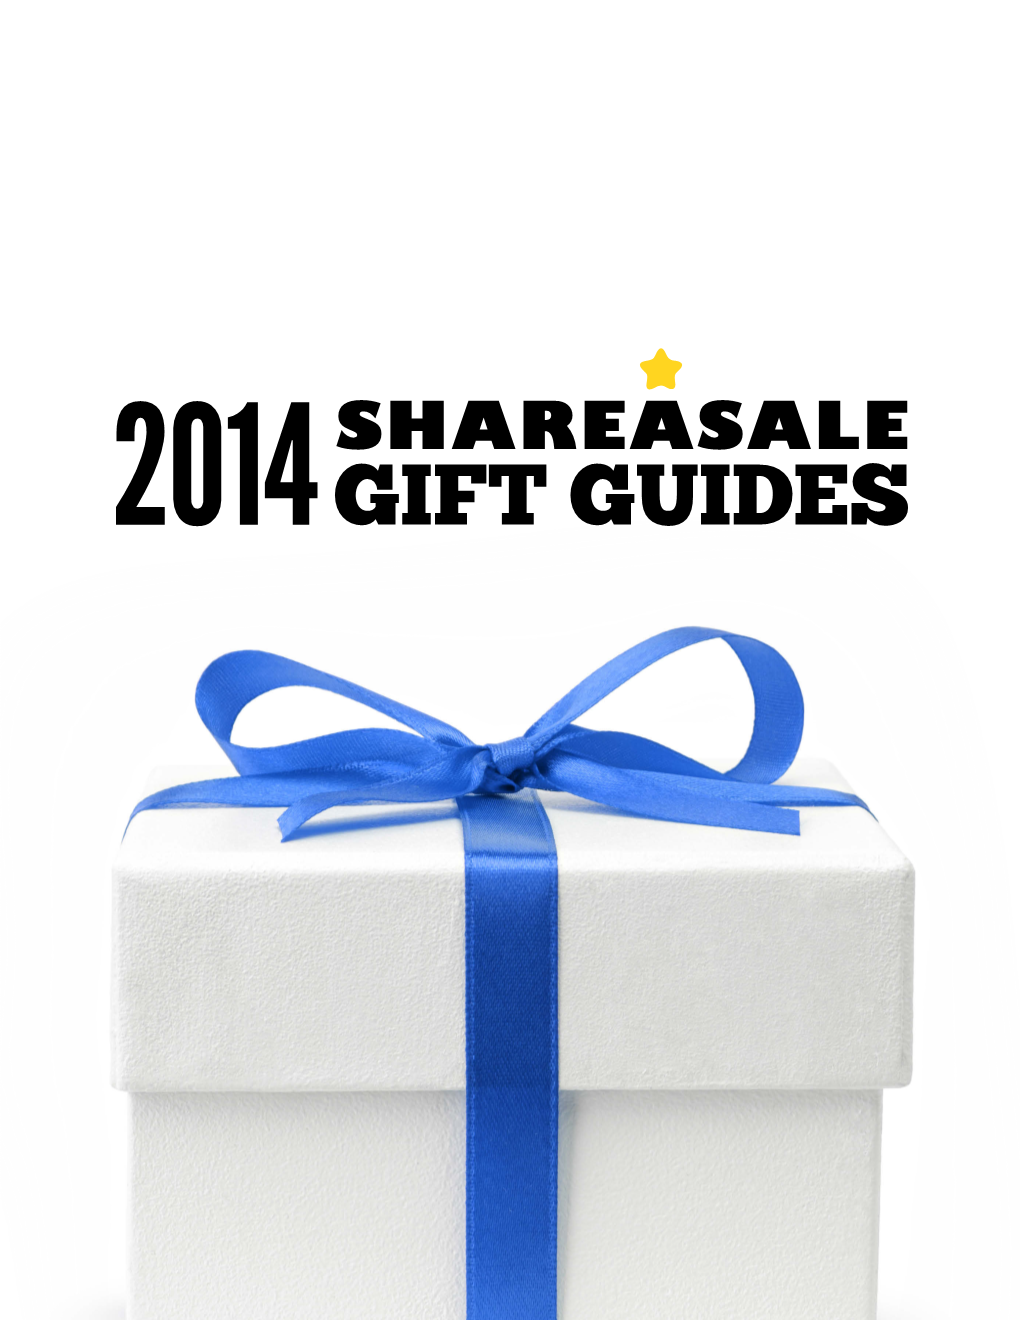 Notes and Tidbits from Shareasale Shareasale's 2014 Gift Guides: 30 Days of Content Ideas for Merchants and Affiliates!